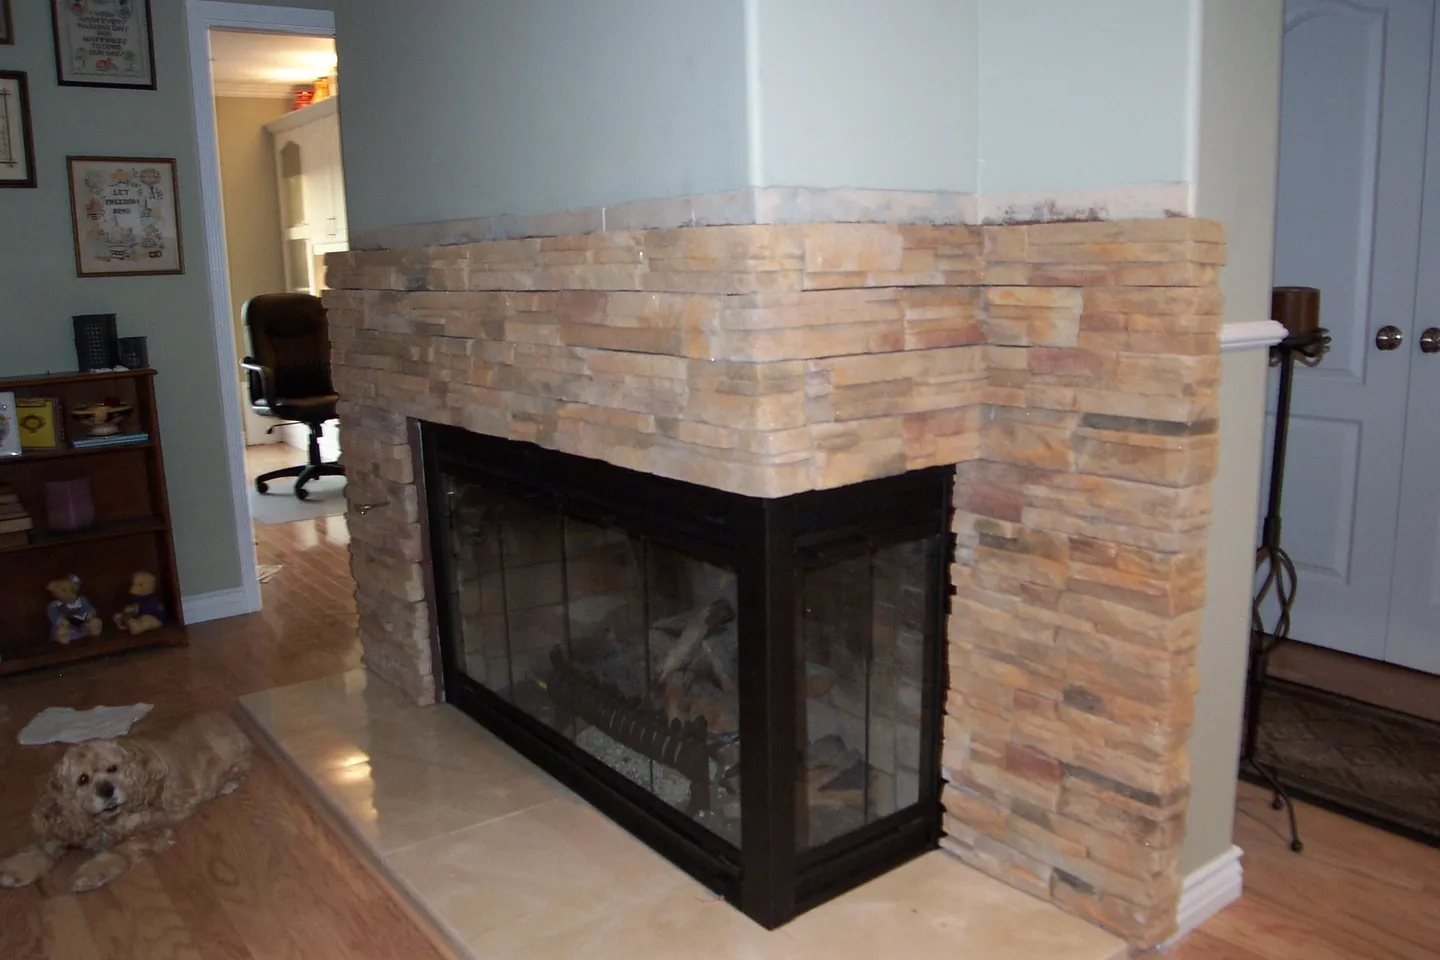 A fireplace with a stone surround and hearth.